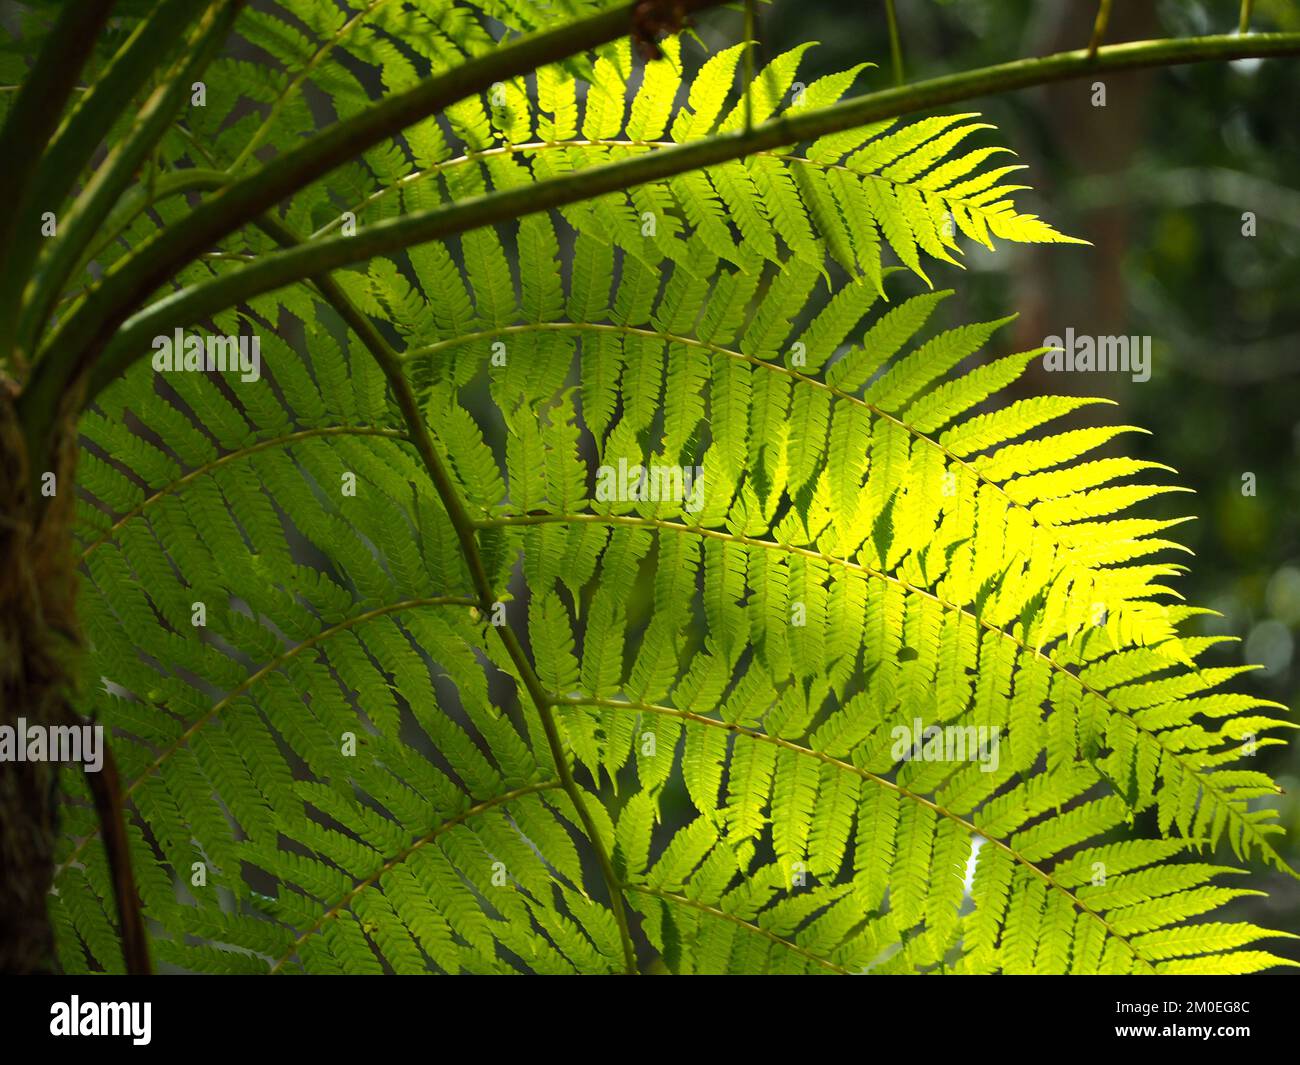 Fern leaves glowing in the sunlight, Australian sub tropical coastal garden, photosynthesis in action Stock Photo